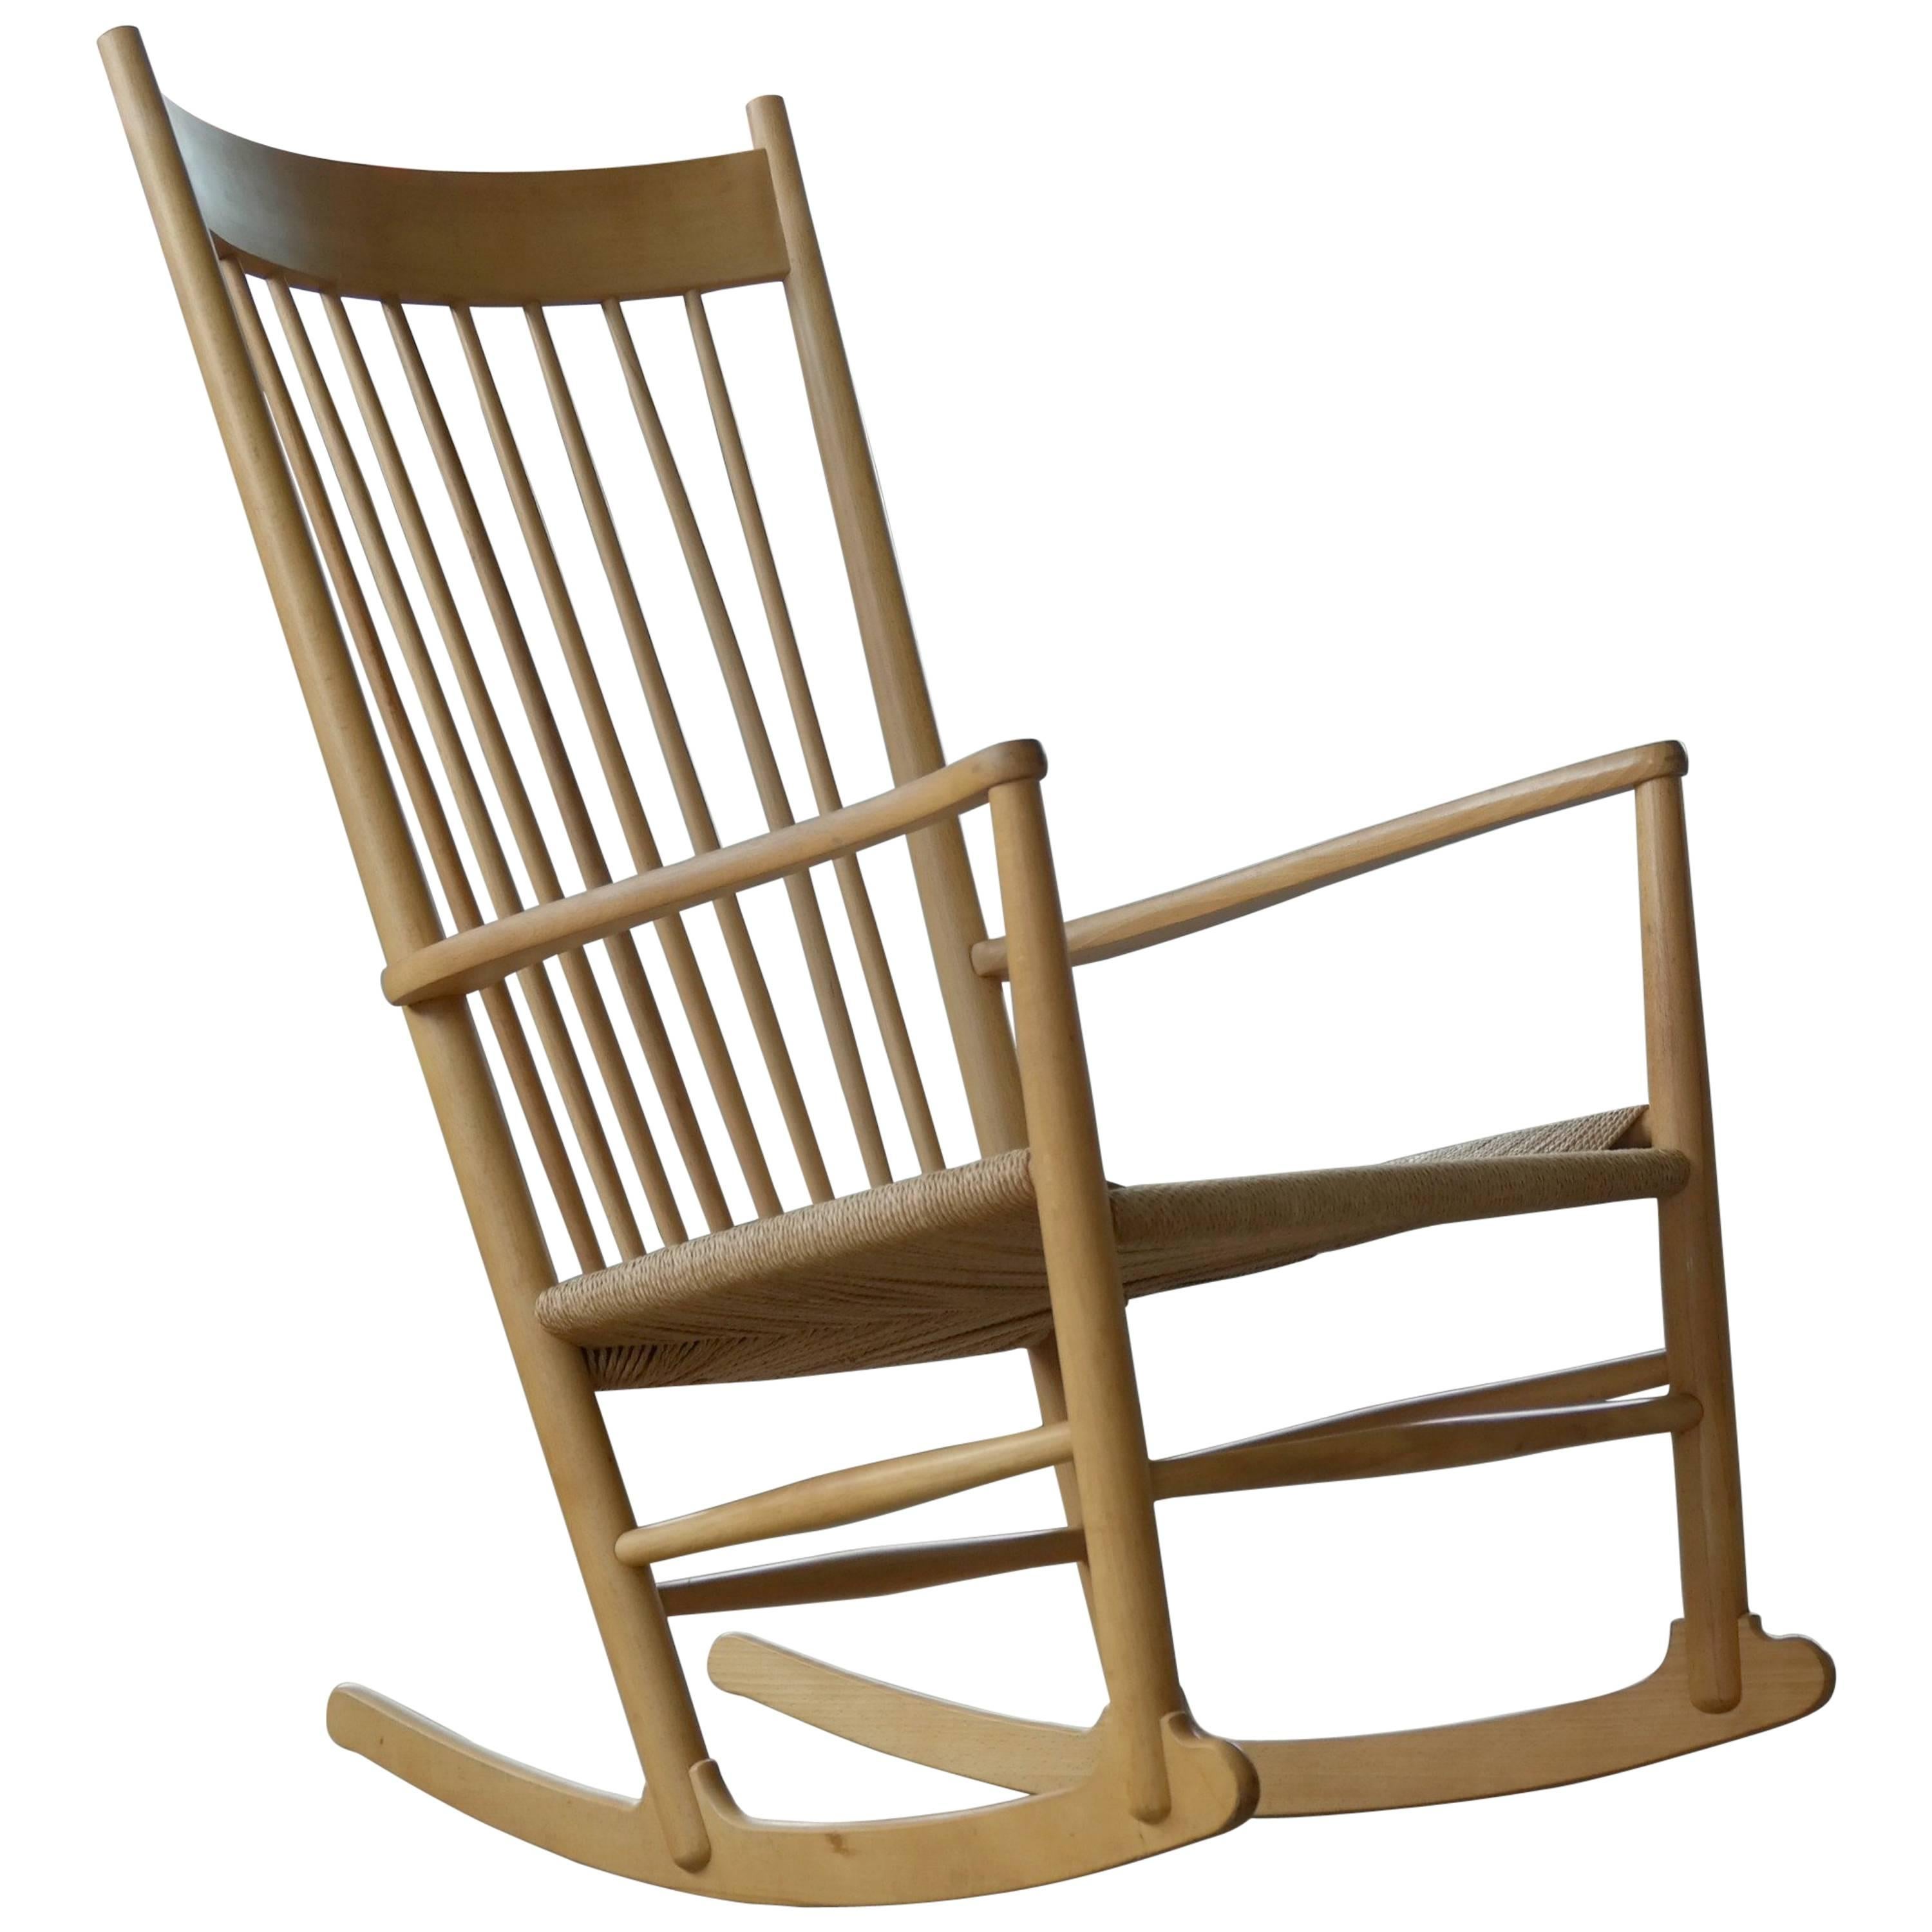 Hans Wegner Rocking Chair in Beech and Papercord Made for FDB, Denmark, 1950s